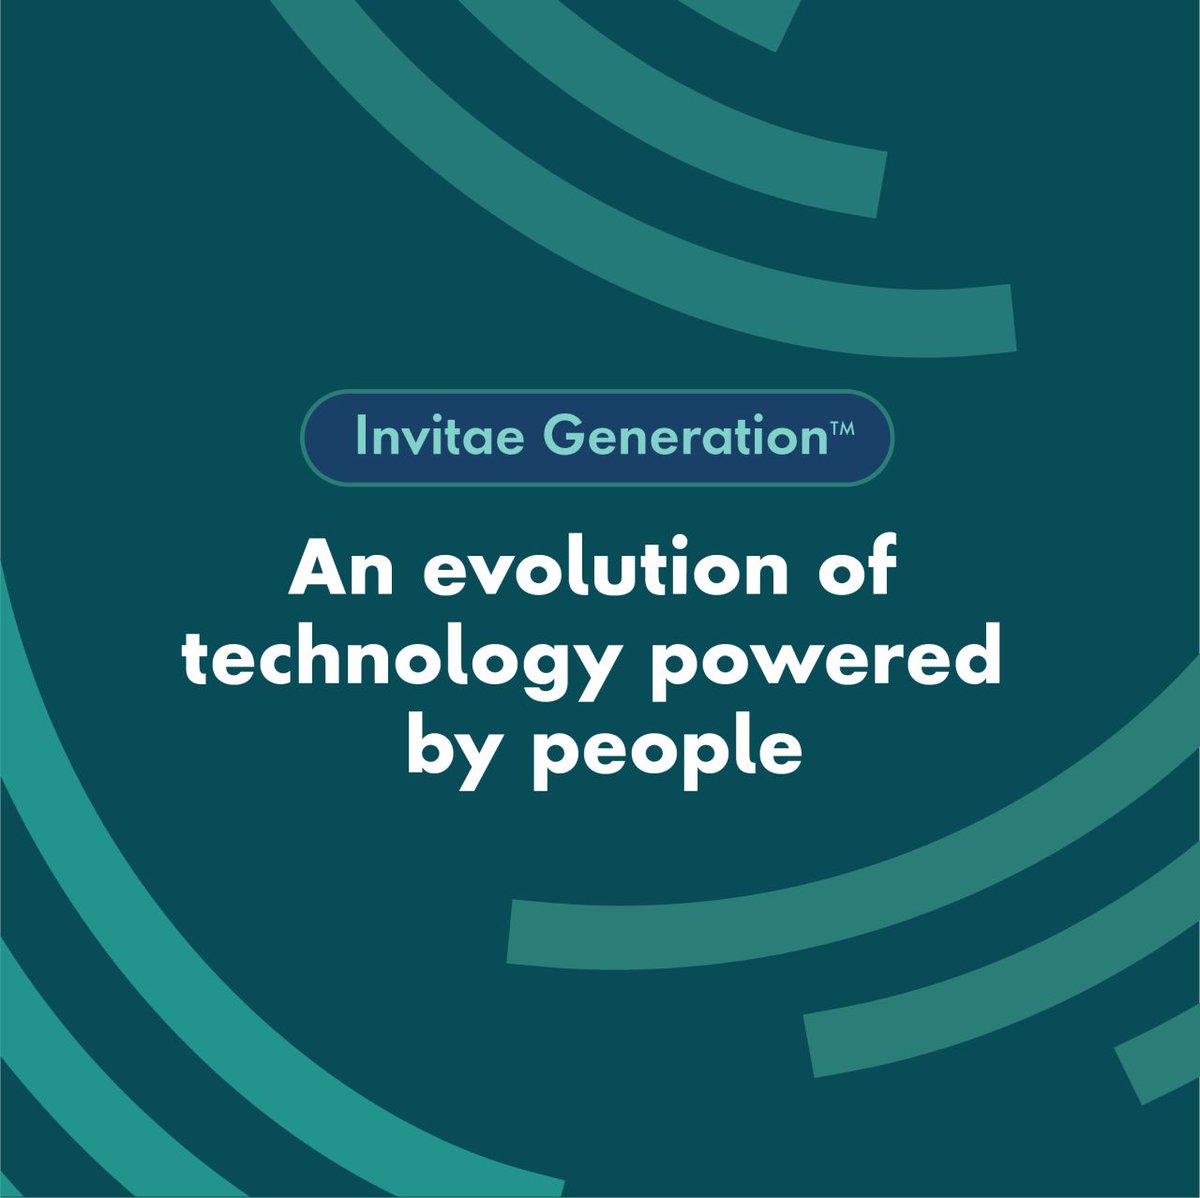 We’re evolving our technology and inputs for genetic testing so quickly we had to give them one name. Invitae Generation™ better leverages existing data by introducing and implementing new tools. Find out how: invit.ae/49y0OCQ #InvitaeGeneration